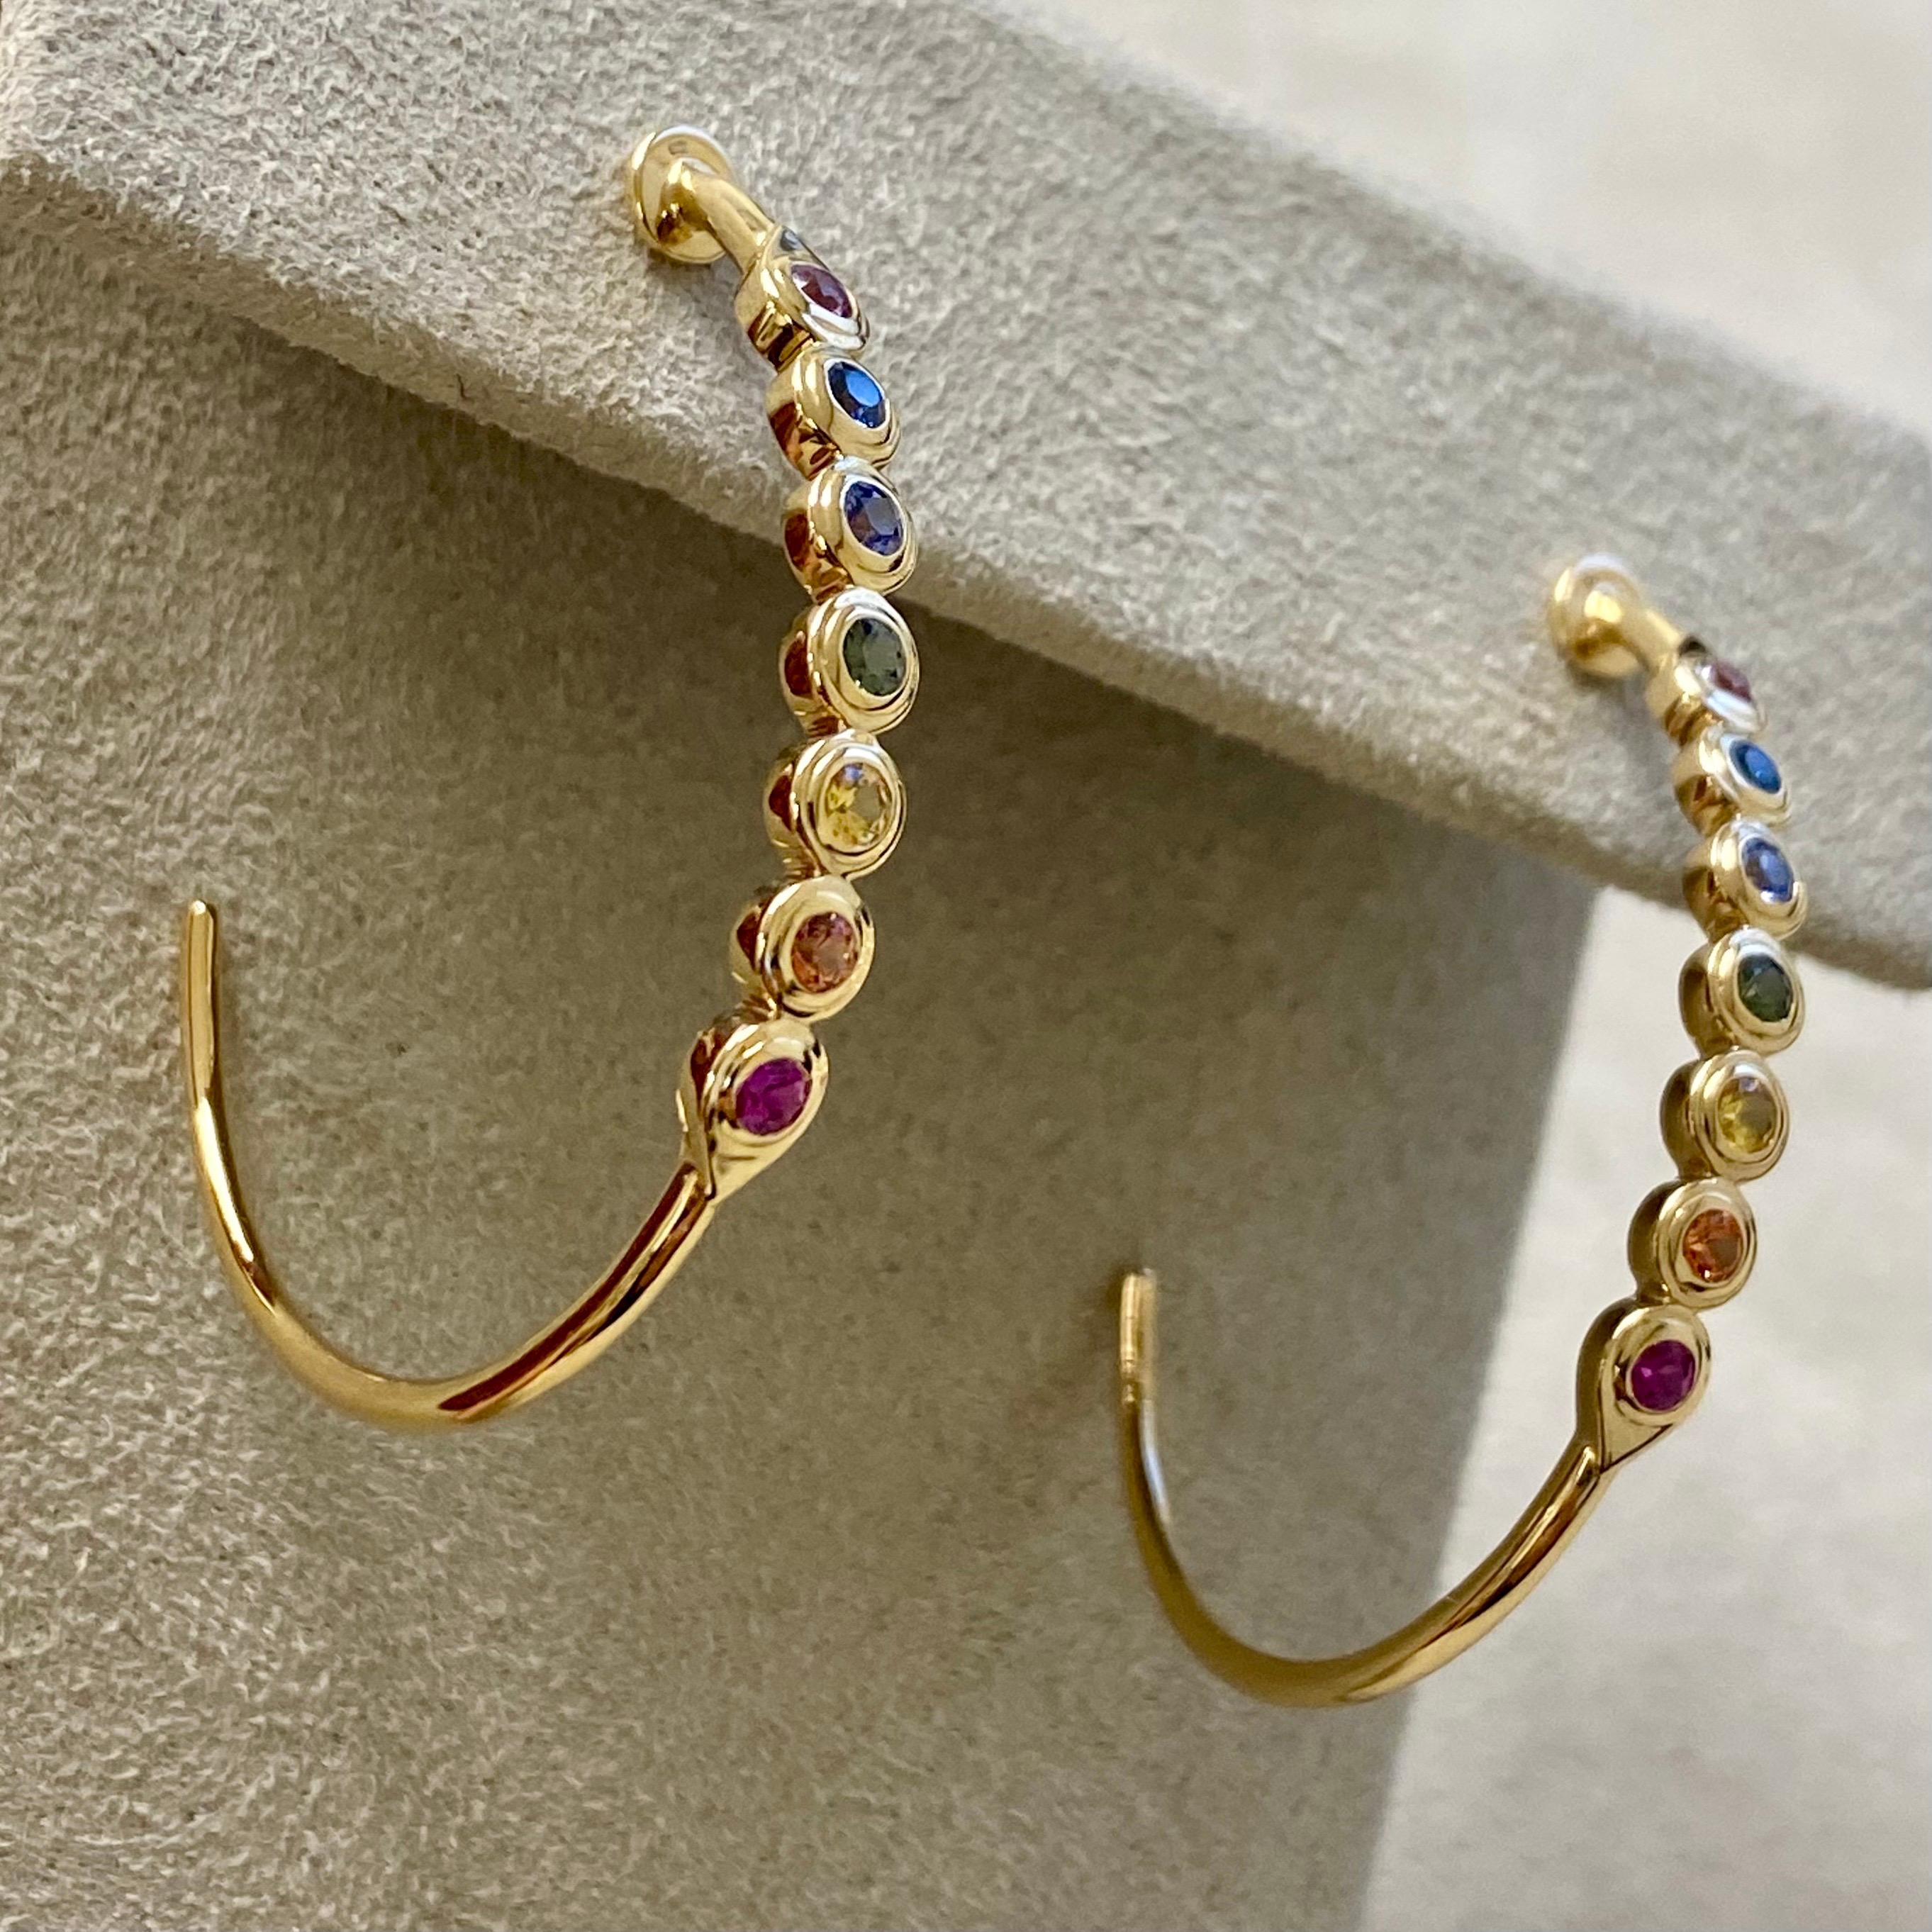 Created in 18 karat yellow gold
Rainbow sapphires 0.80 carat approx.
18 karat yellow gold butterfly backs

Expertly molded from 18-karat yellow gold, these earrings showcase stunning rainbow sapphires, weighing in around 0.80 carats, and secure with